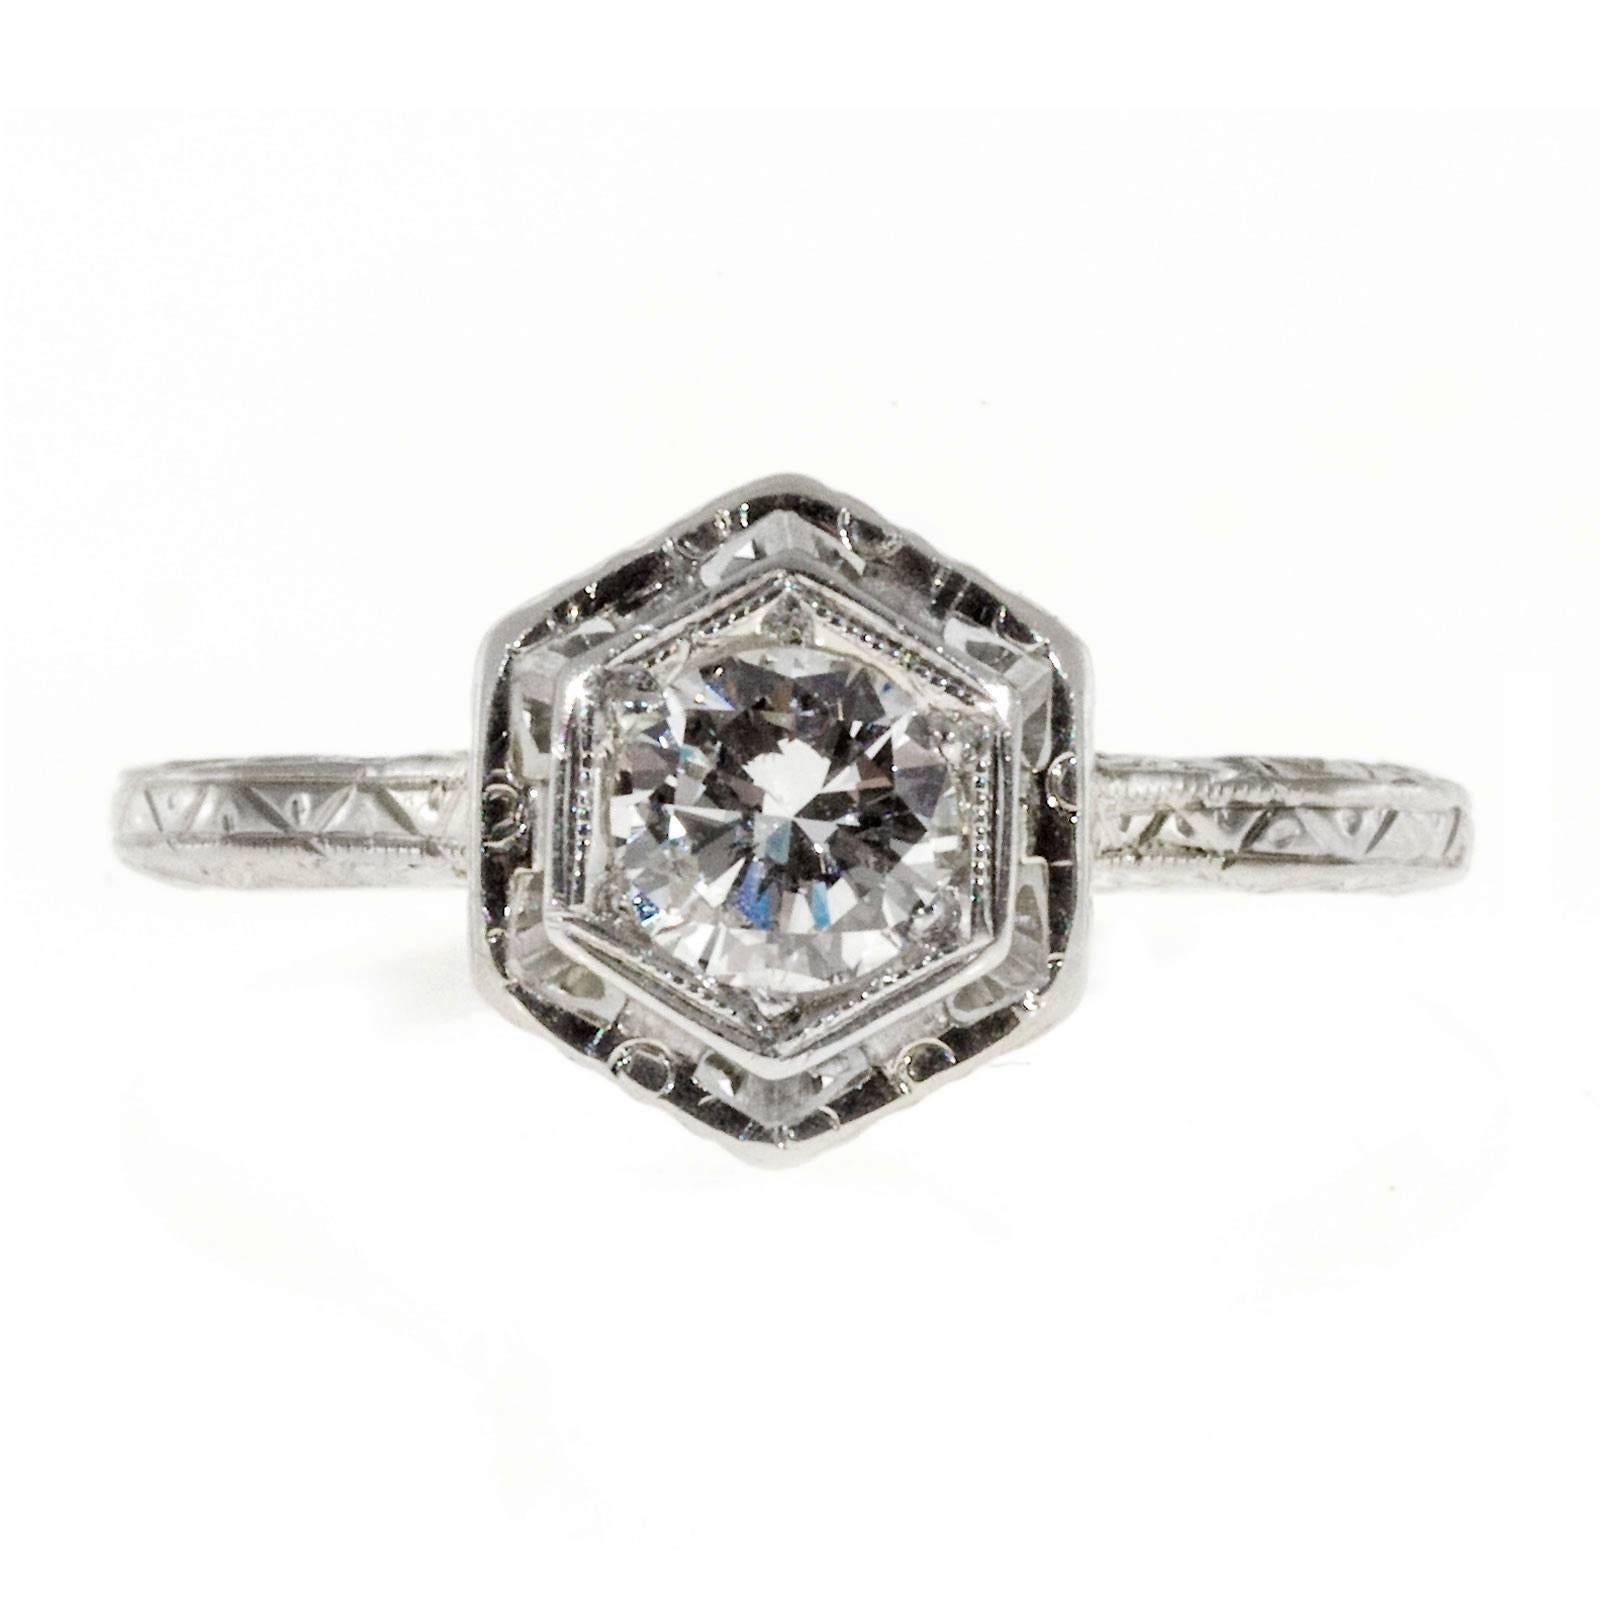 Late Art Deco 1940 8 side top filigree and hand engraved original diamond engagement ring in 14k white gold. crt

1 round transitions cut white extra sparkly diamond, approx. total weight .31cts, F-G, SI1, Depth: 55.1% Table: 65%.
Size 5 and